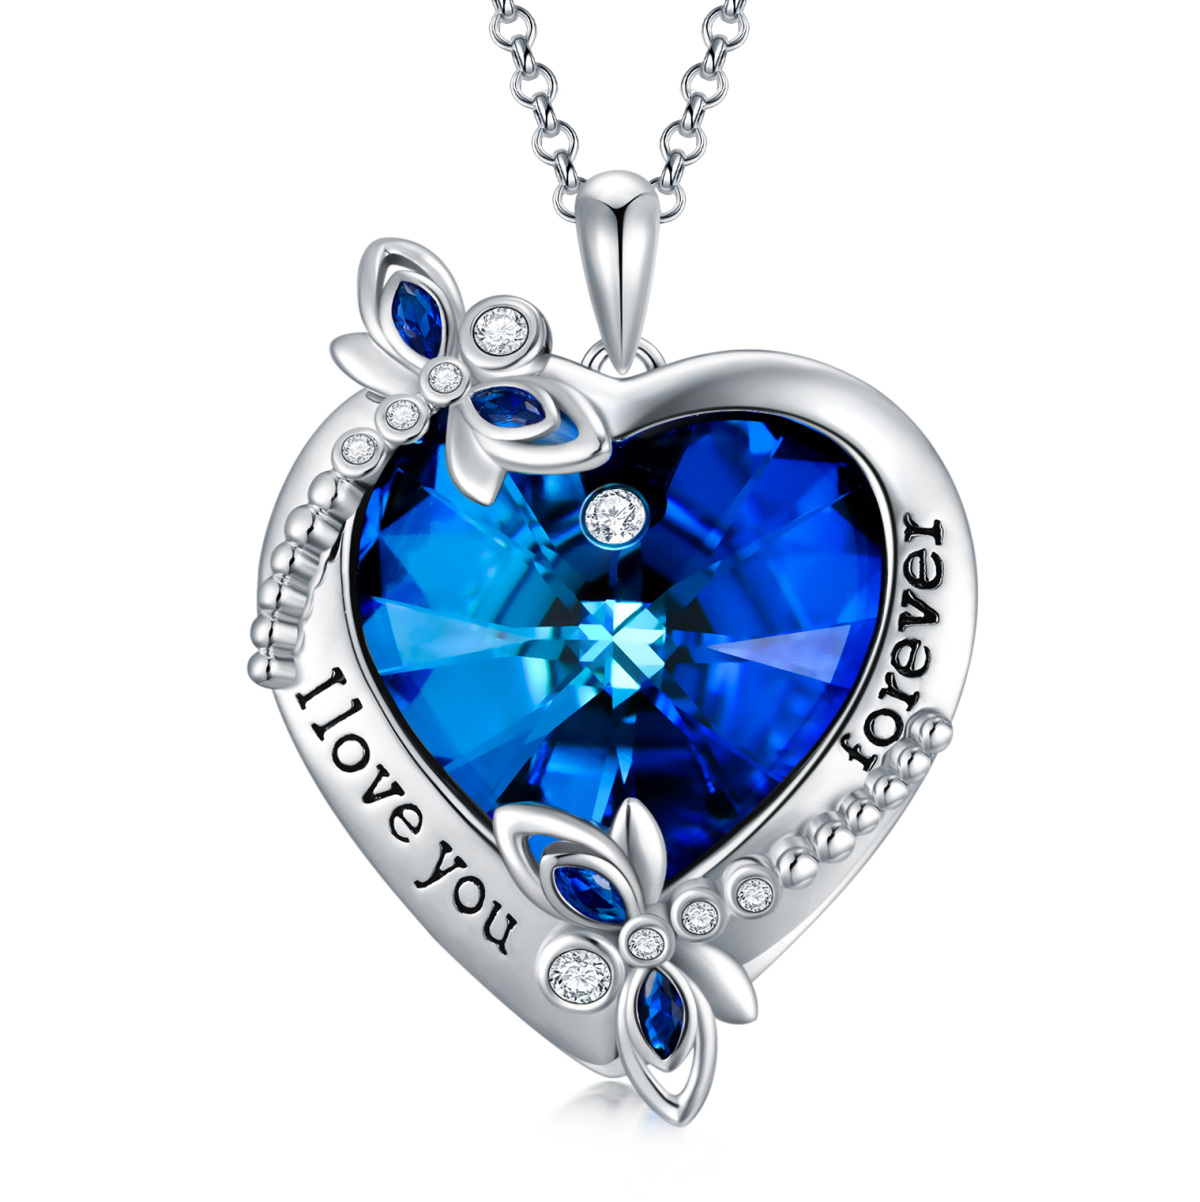 Sterling Silver Heart Shaped Dragonfly & Heart Crystal Pendant Necklace with Engraved Word-1